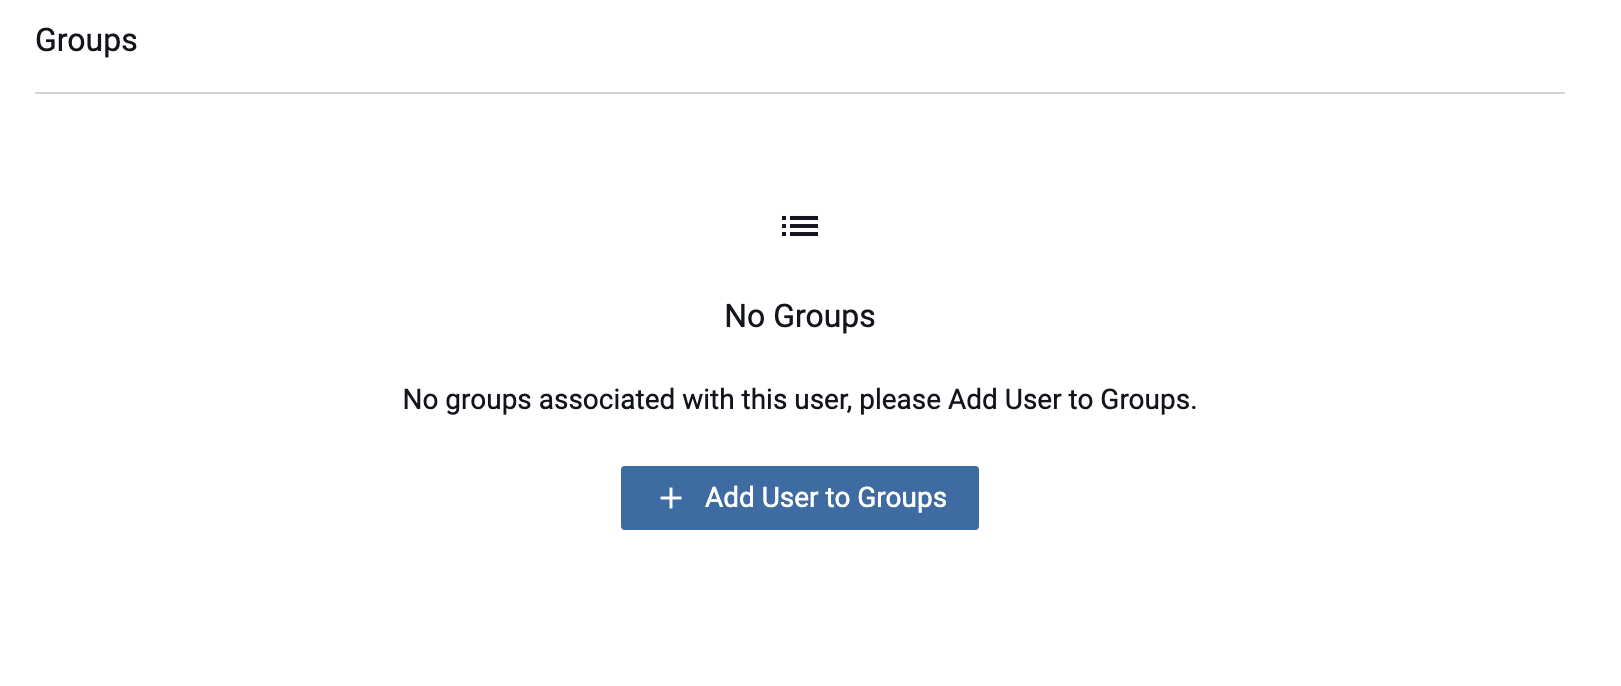 Assign User to Groups Button